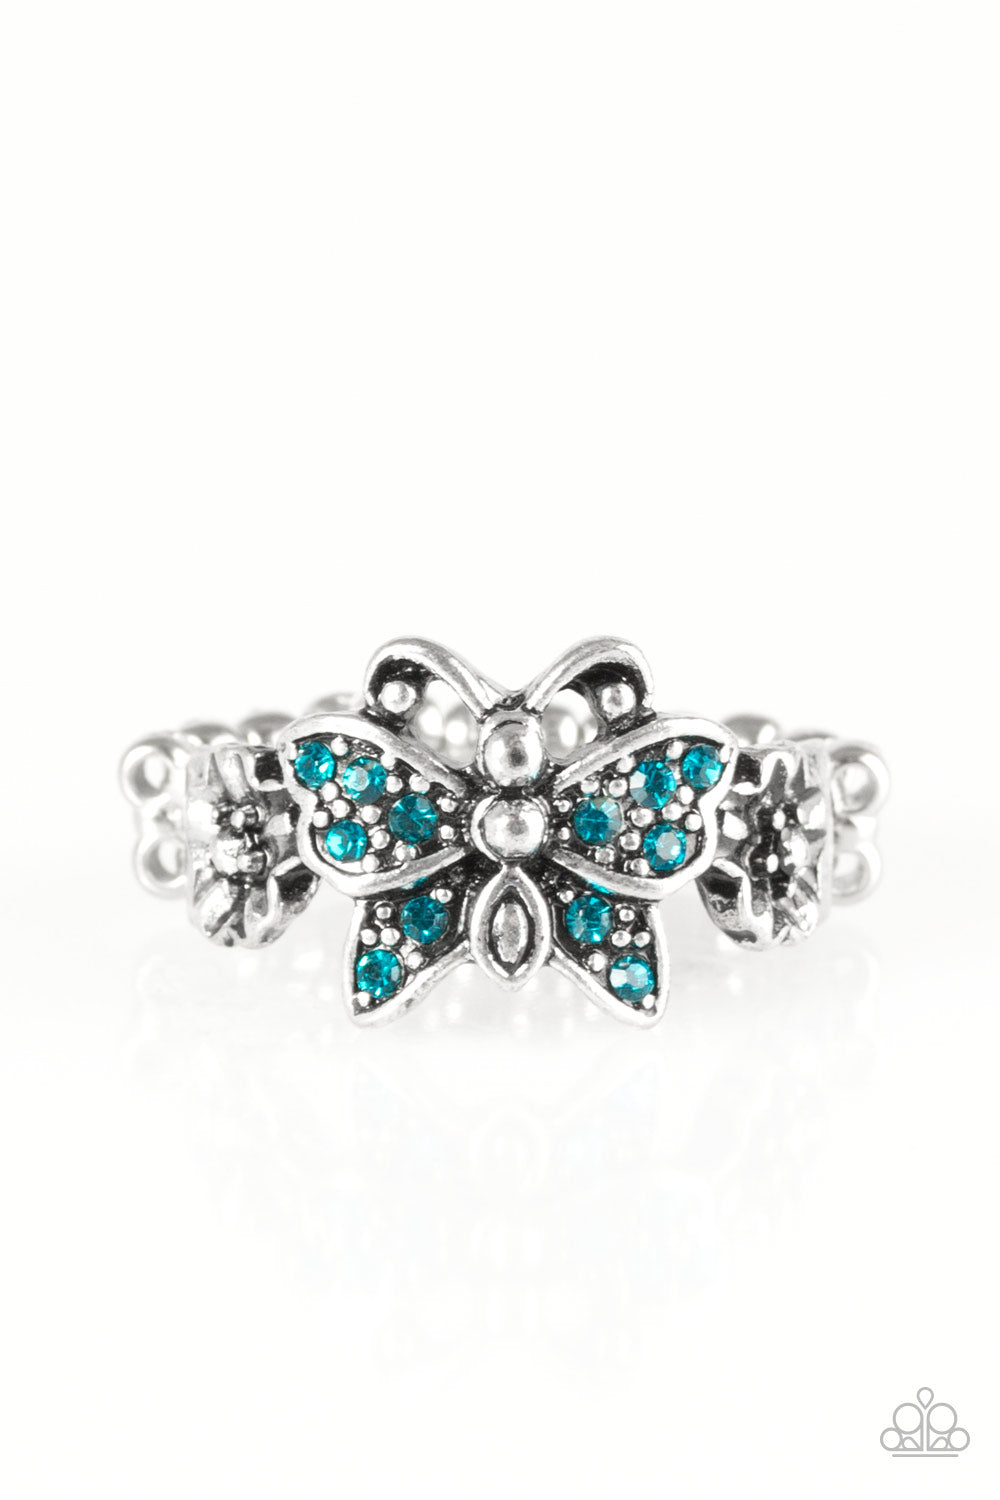 Paparazzi Accessories Whimsical Wonderland - Blue Ring